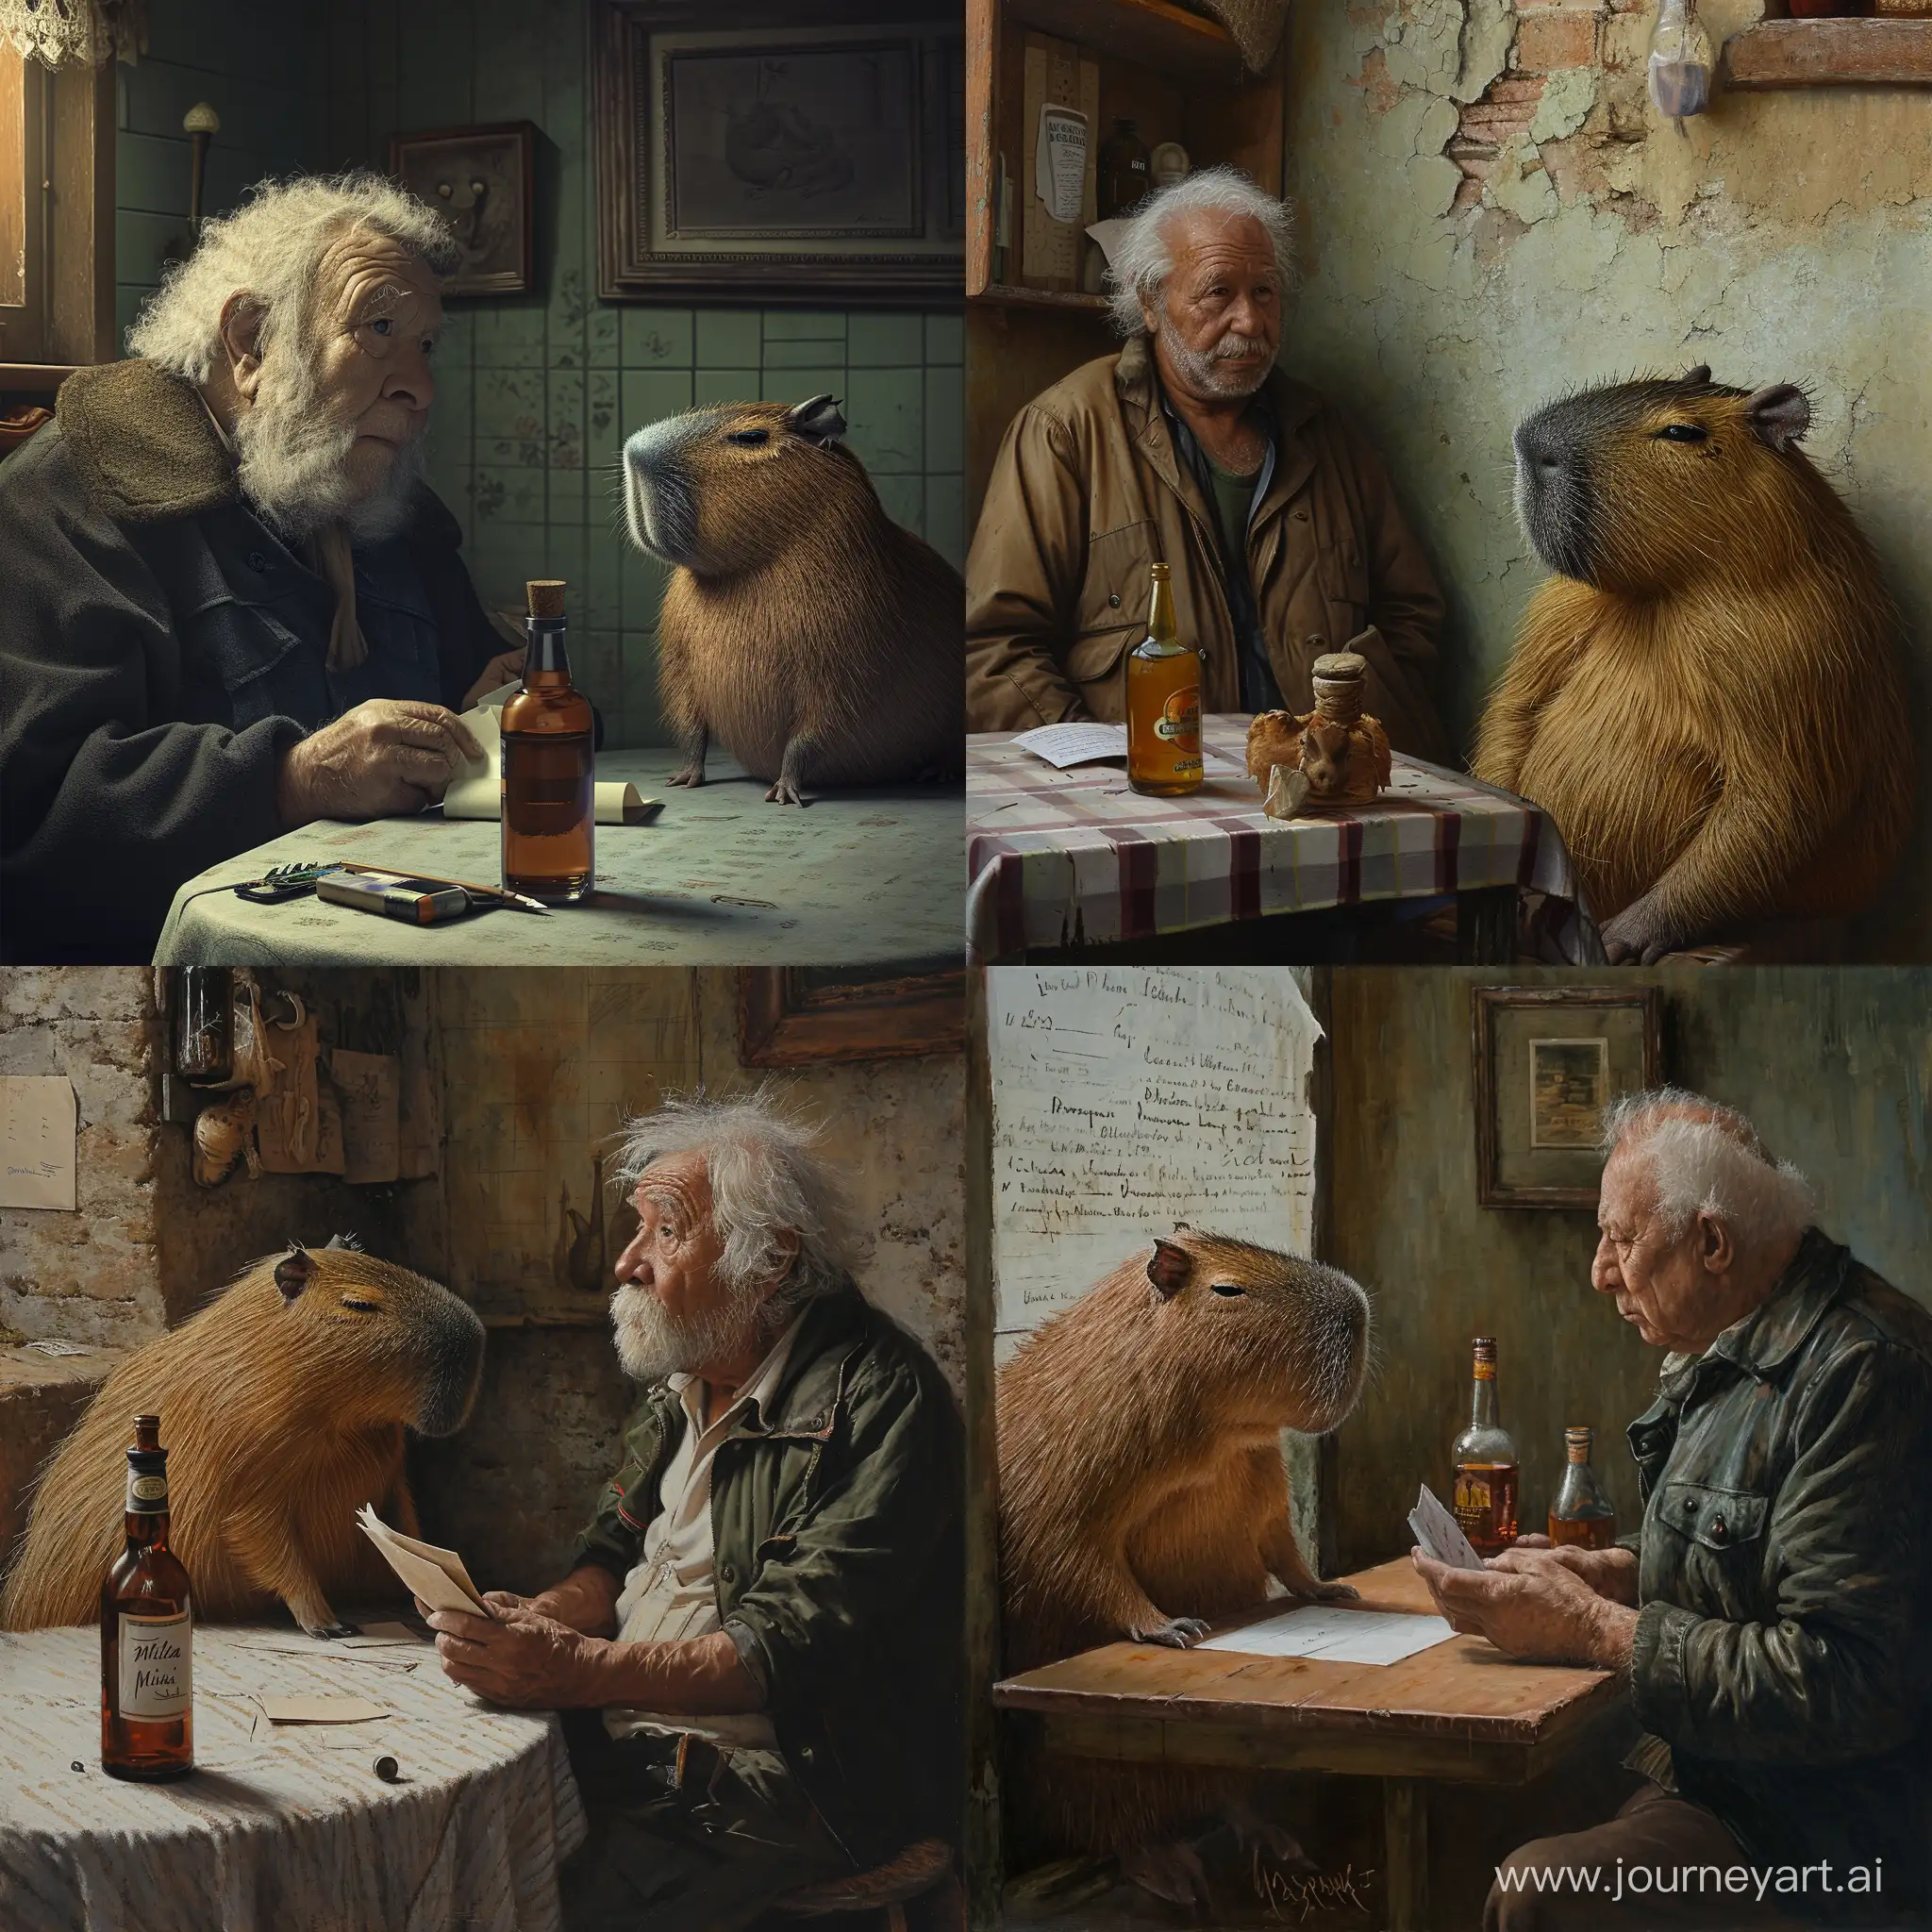 Realistic-Scene-Old-Jorge-Reading-a-Letter-with-a-Capybara-on-the-Table